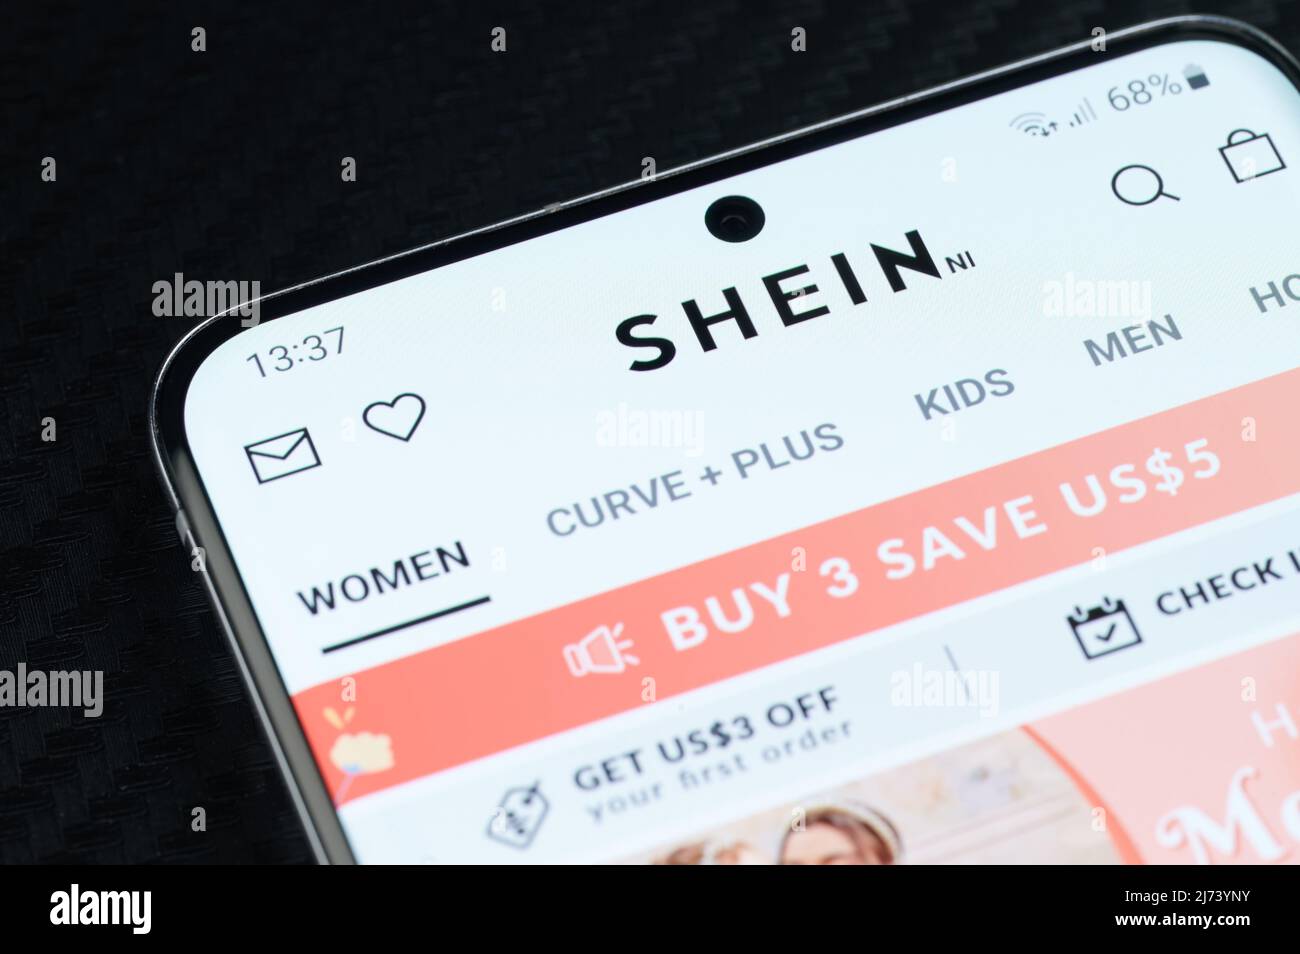 New york, USA - May 5, 2022: Buying on shein online shop app on smartphone  screen close up view Stock Photo - Alamy